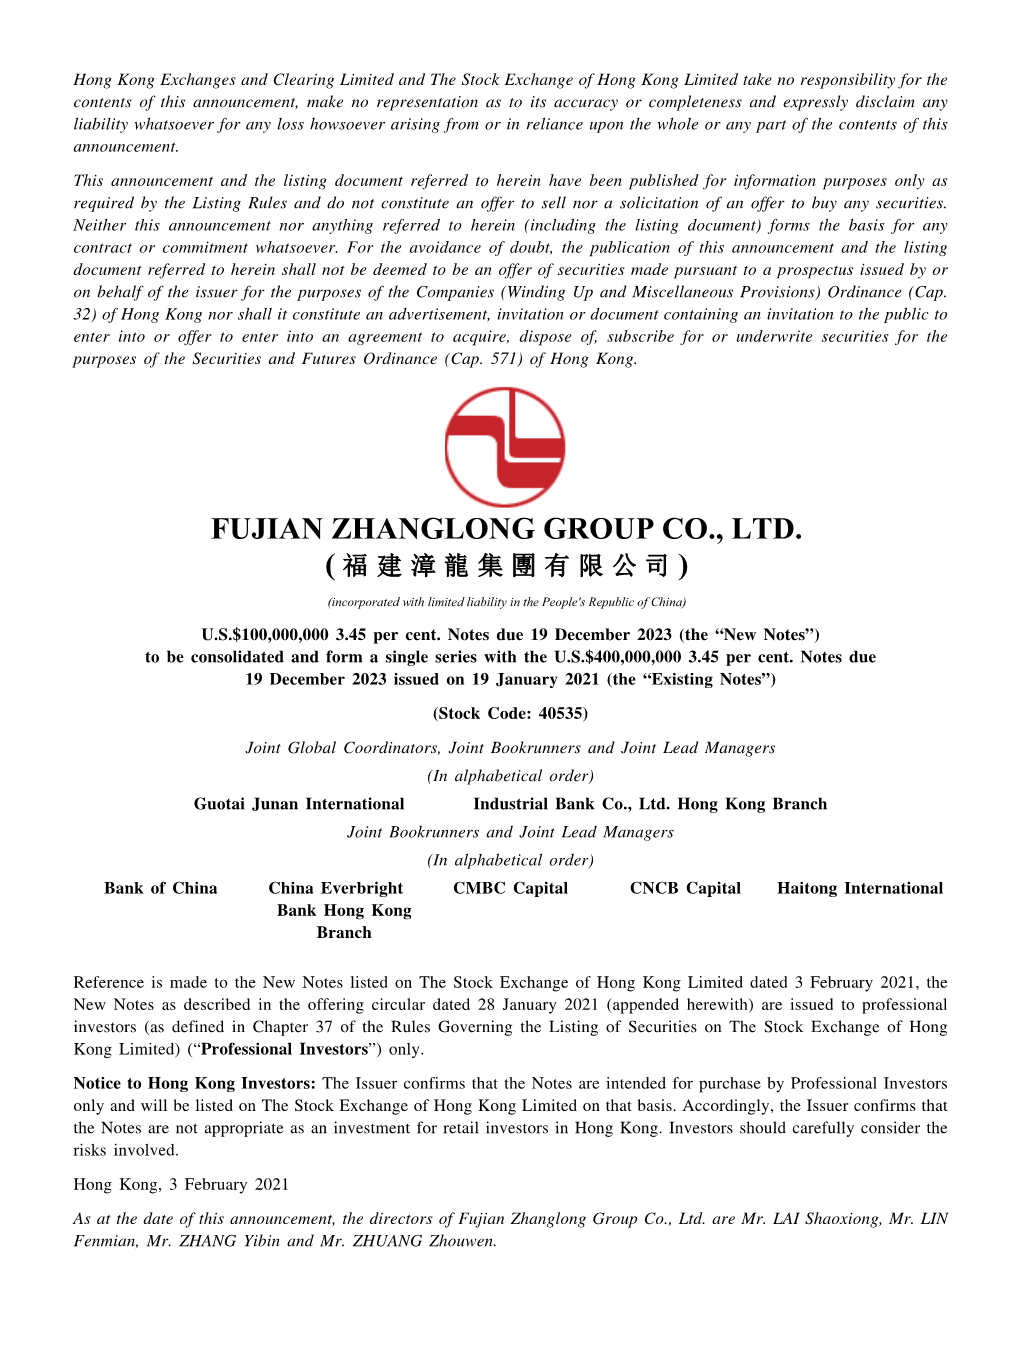 FUJIAN ZHANGLONG GROUP CO., LTD. ( ) (Incorporated with Limited Liability in the People's Republic of China)